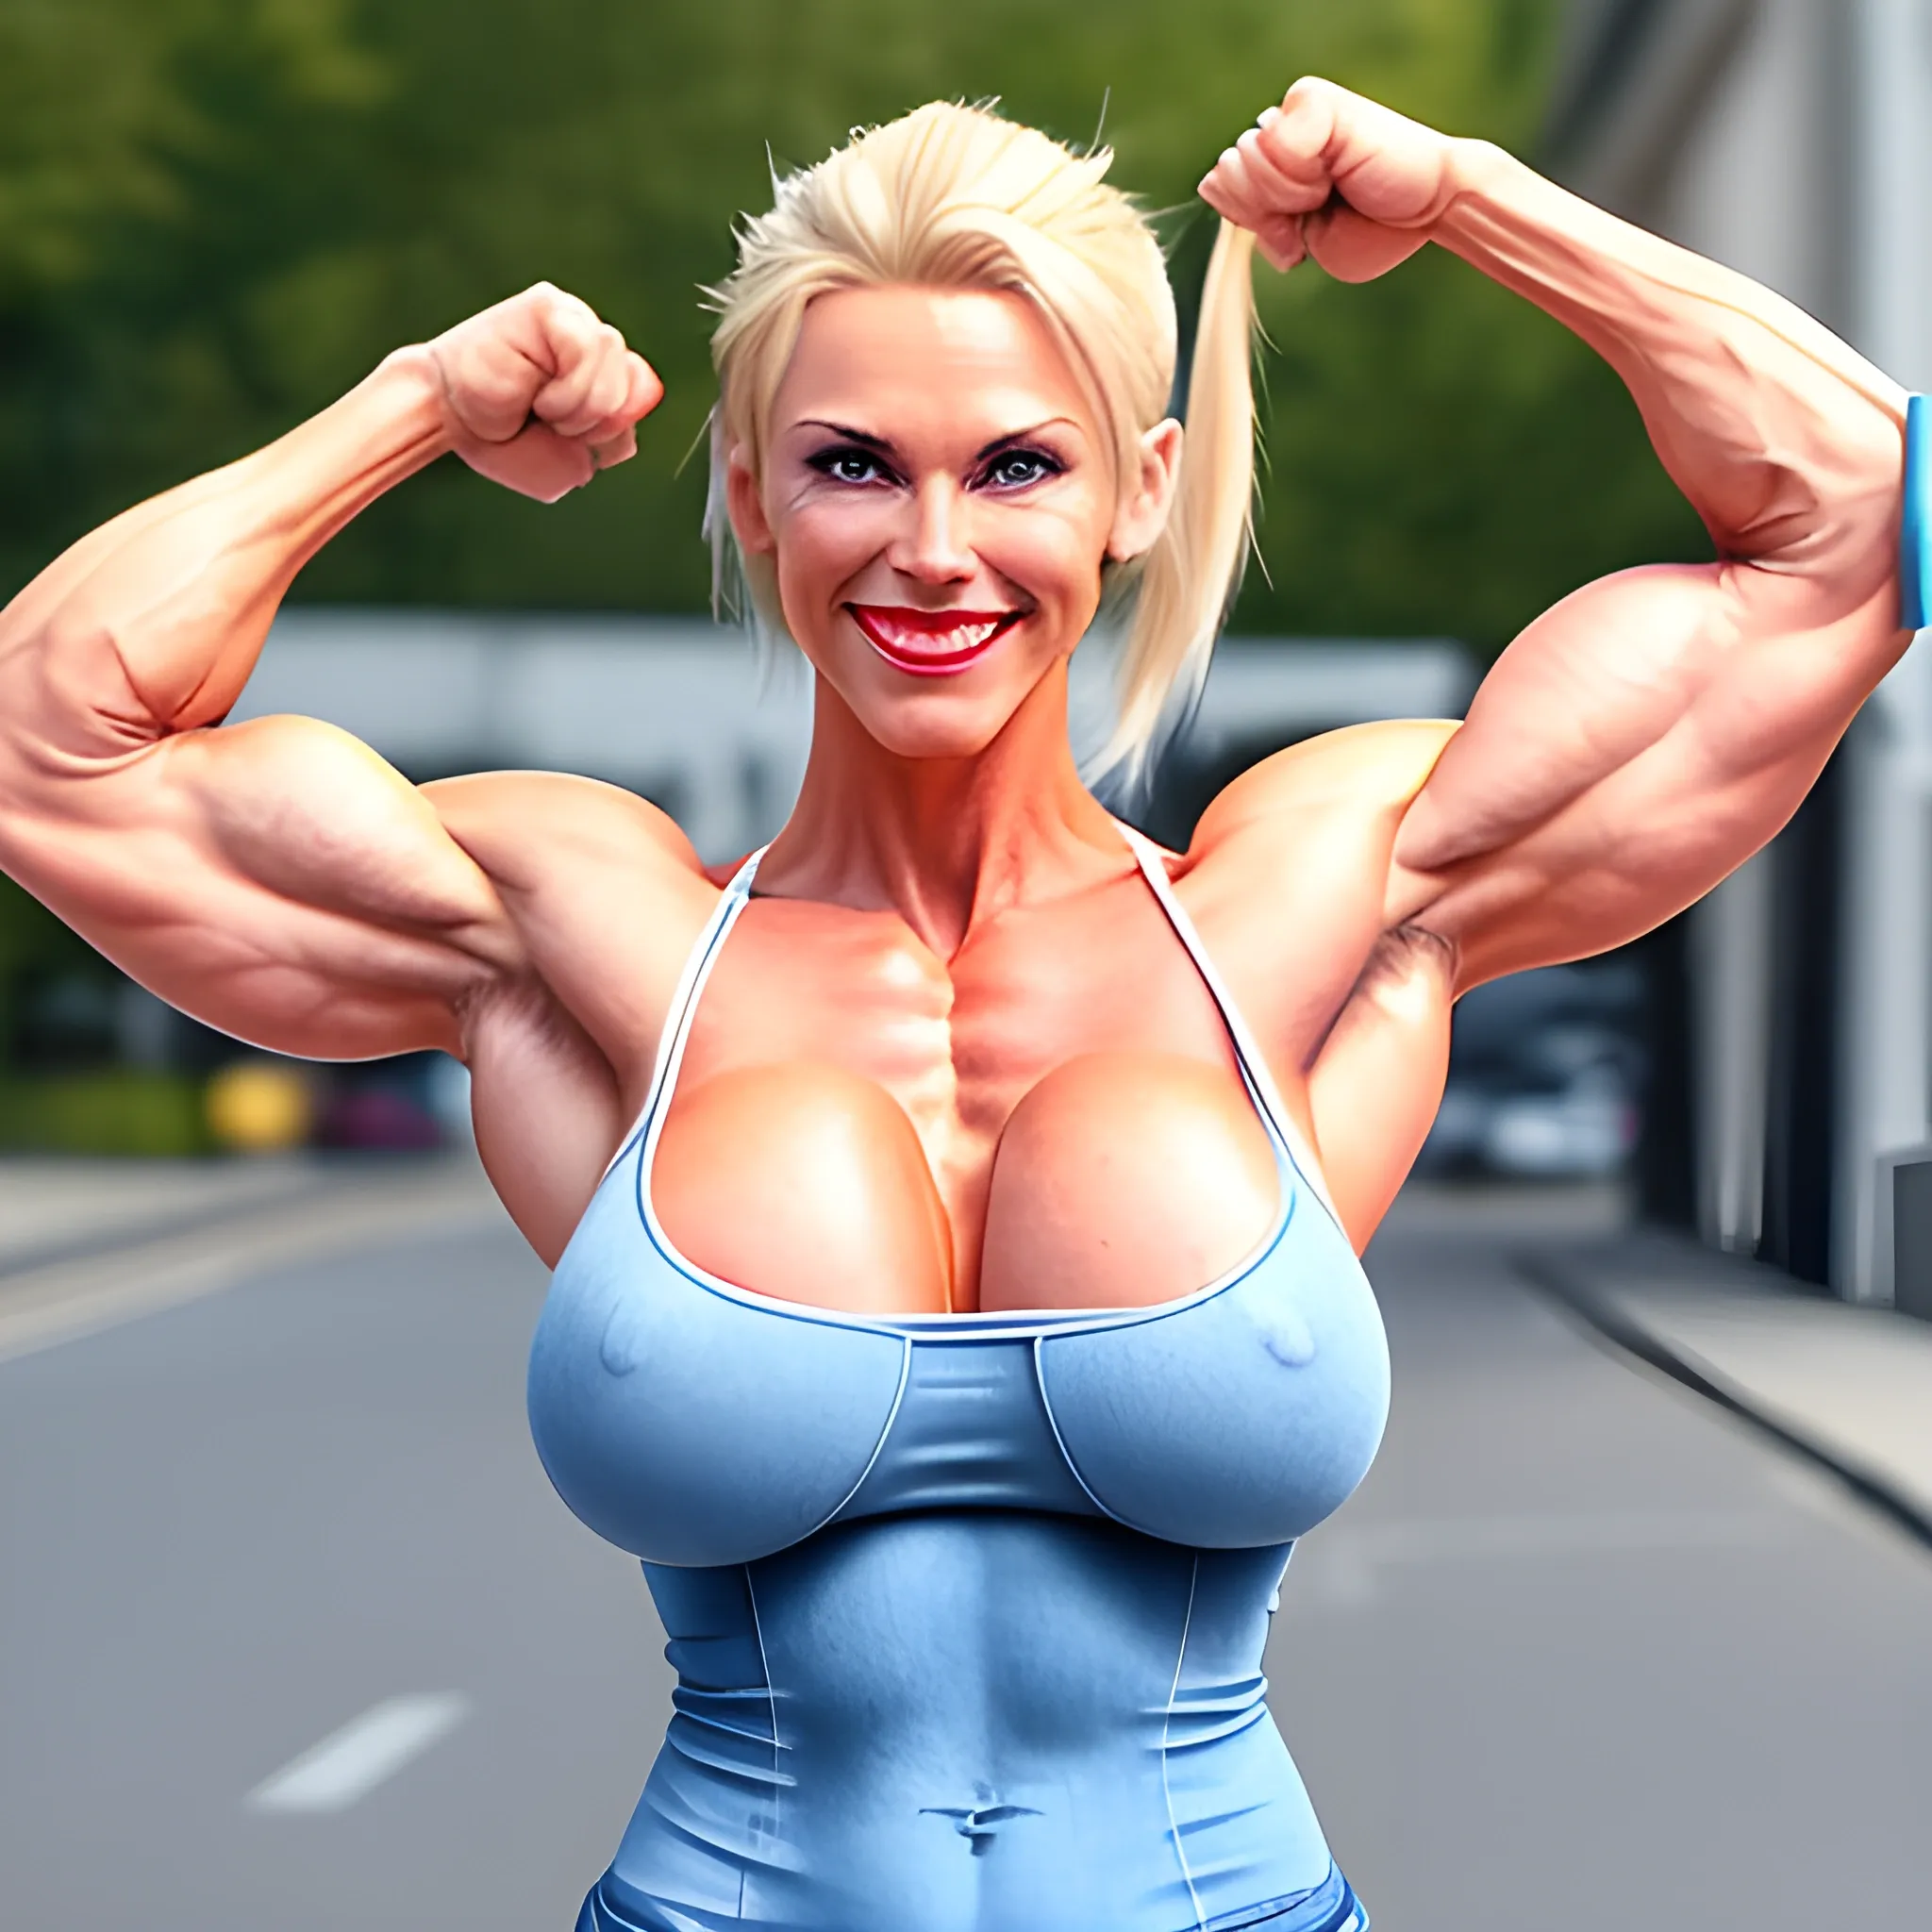 Colossal sized gigantic height heavily built young muscular female  bodybuilder huge arm wrist bicep thigh legs blonde hair carrying small boy  - Playground